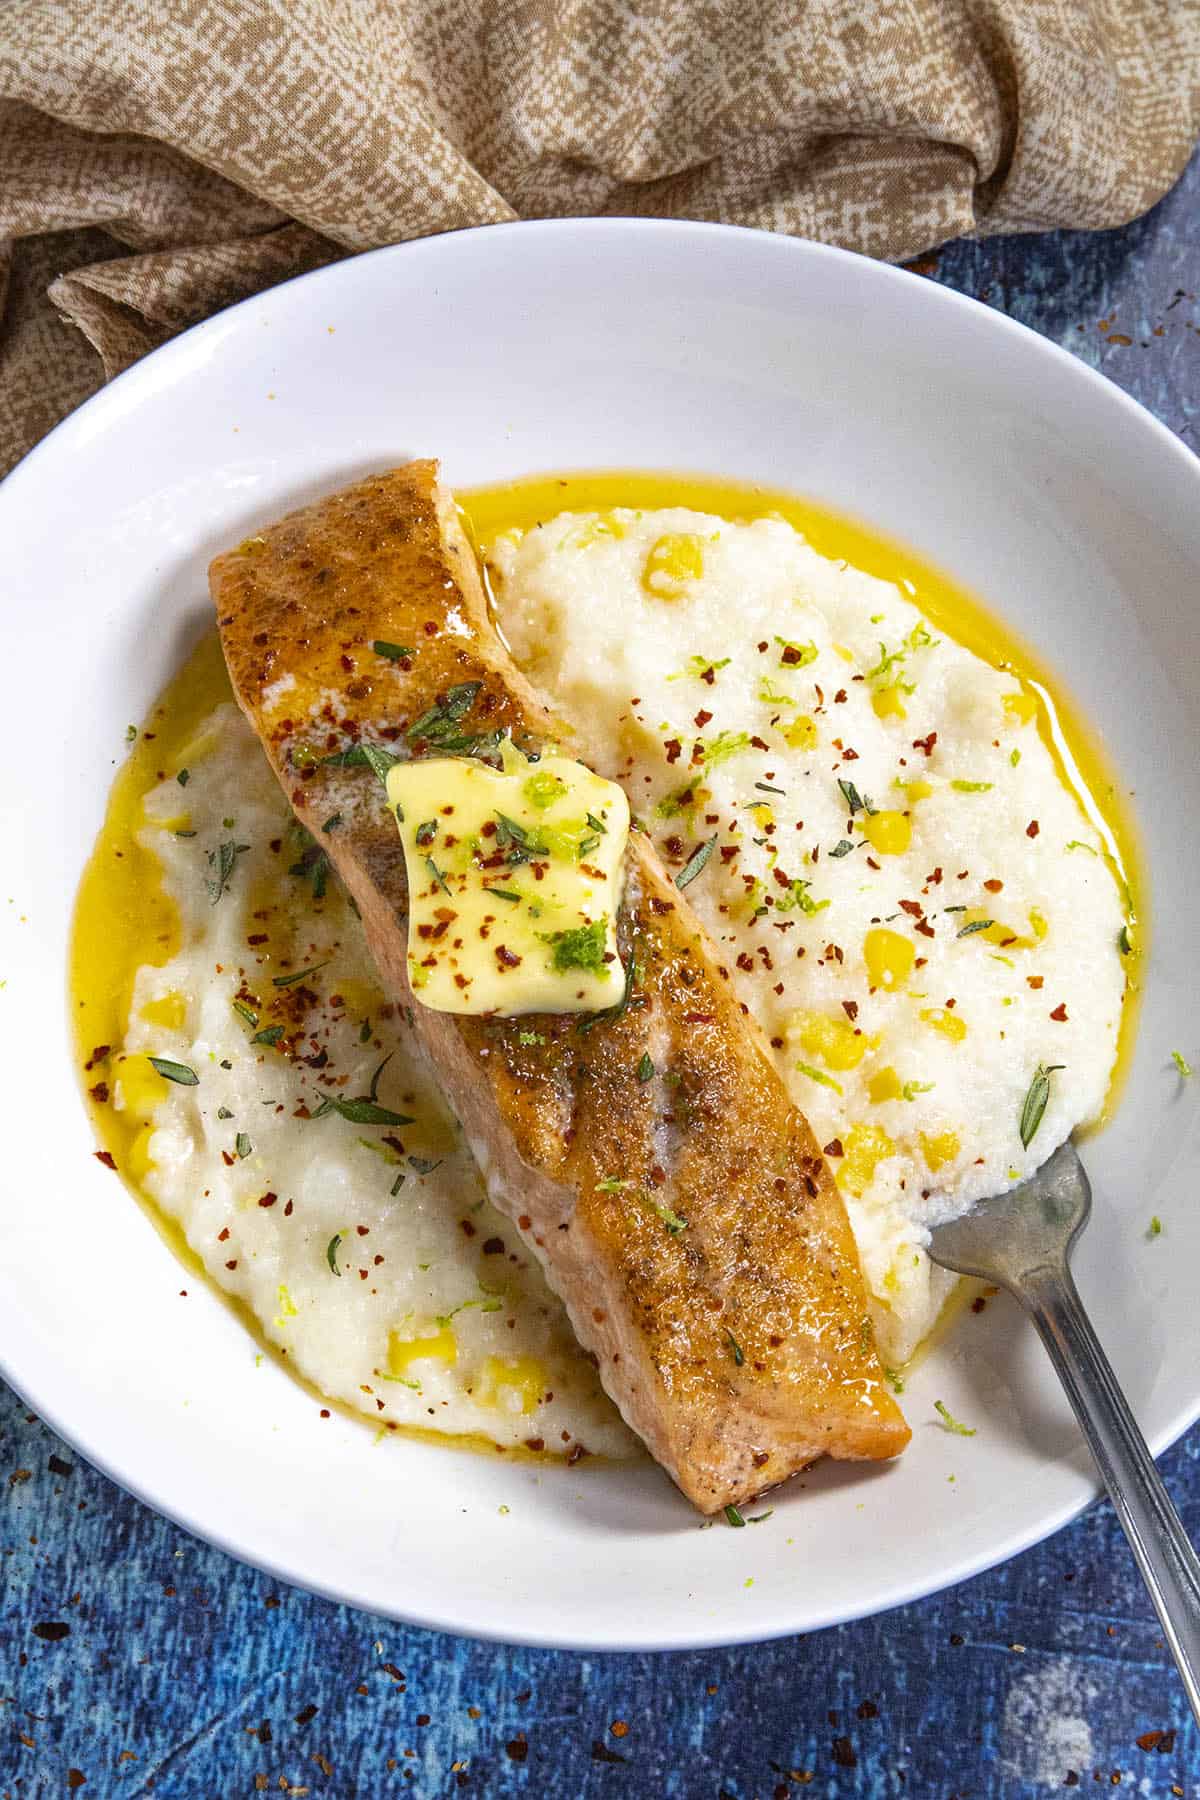 Grilled Steelhead Trout on a plate with Chili-Lime Butter, served over cheesy grits